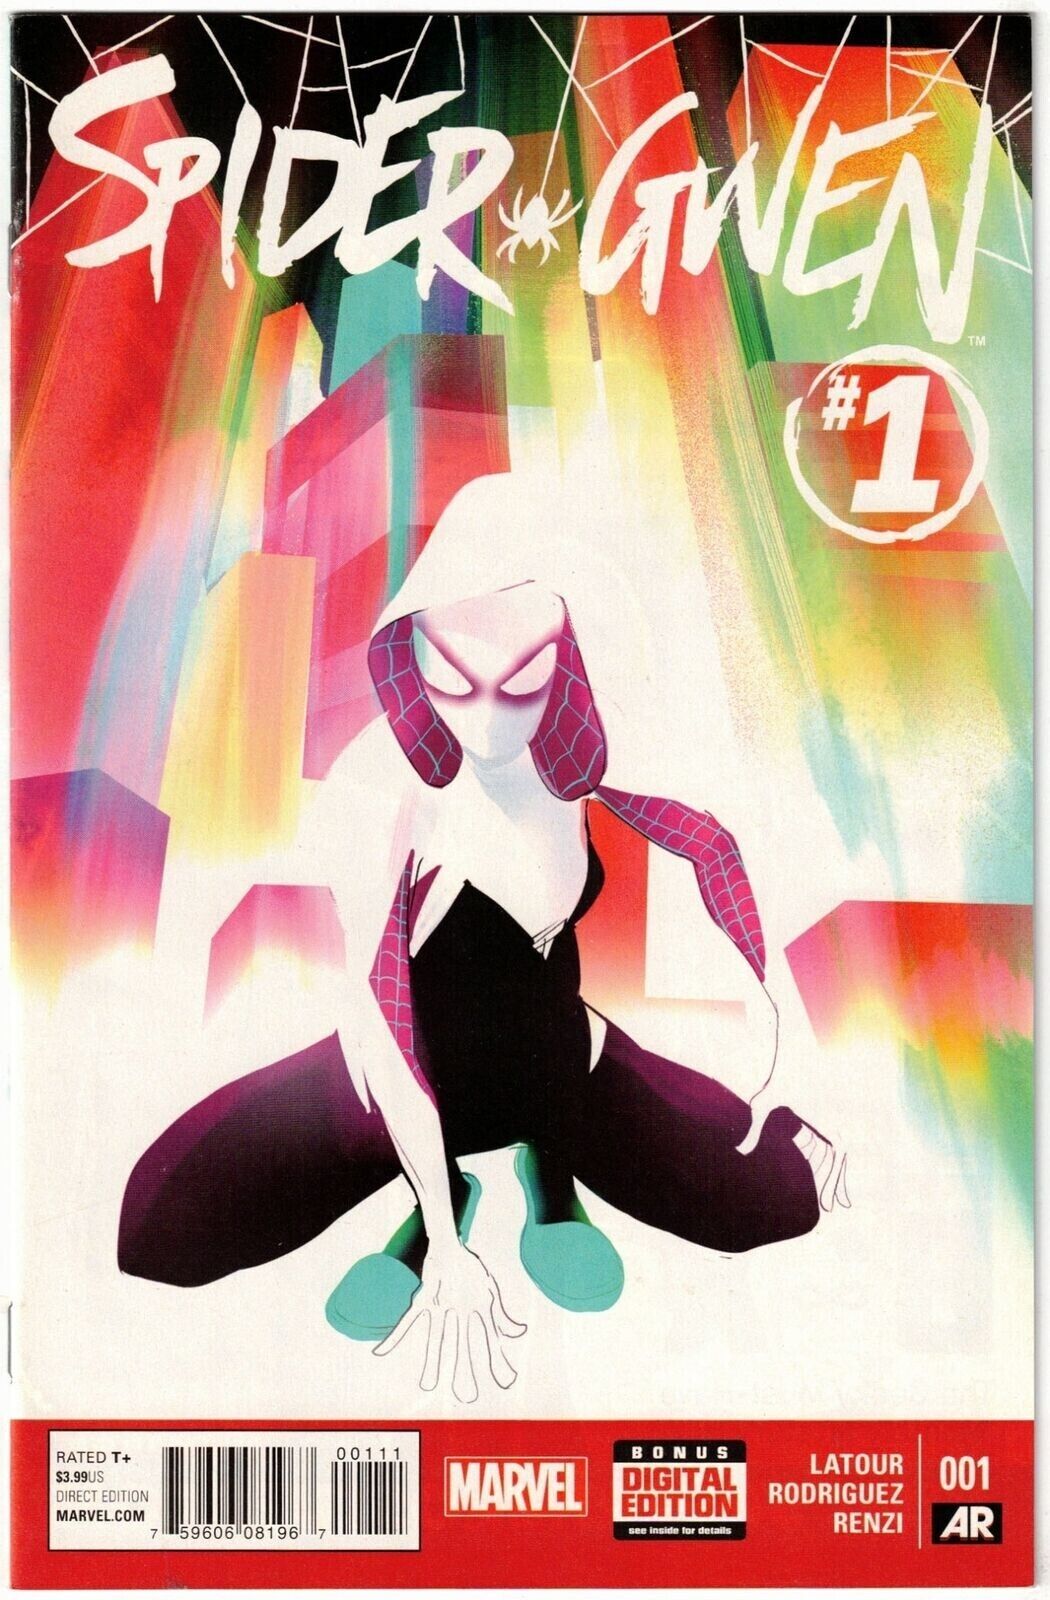 SPIDER-GWEN #1 1ST PRINT 1ST APPEARANCE IN OWN SERIES SPIDER-VERSE STOCK